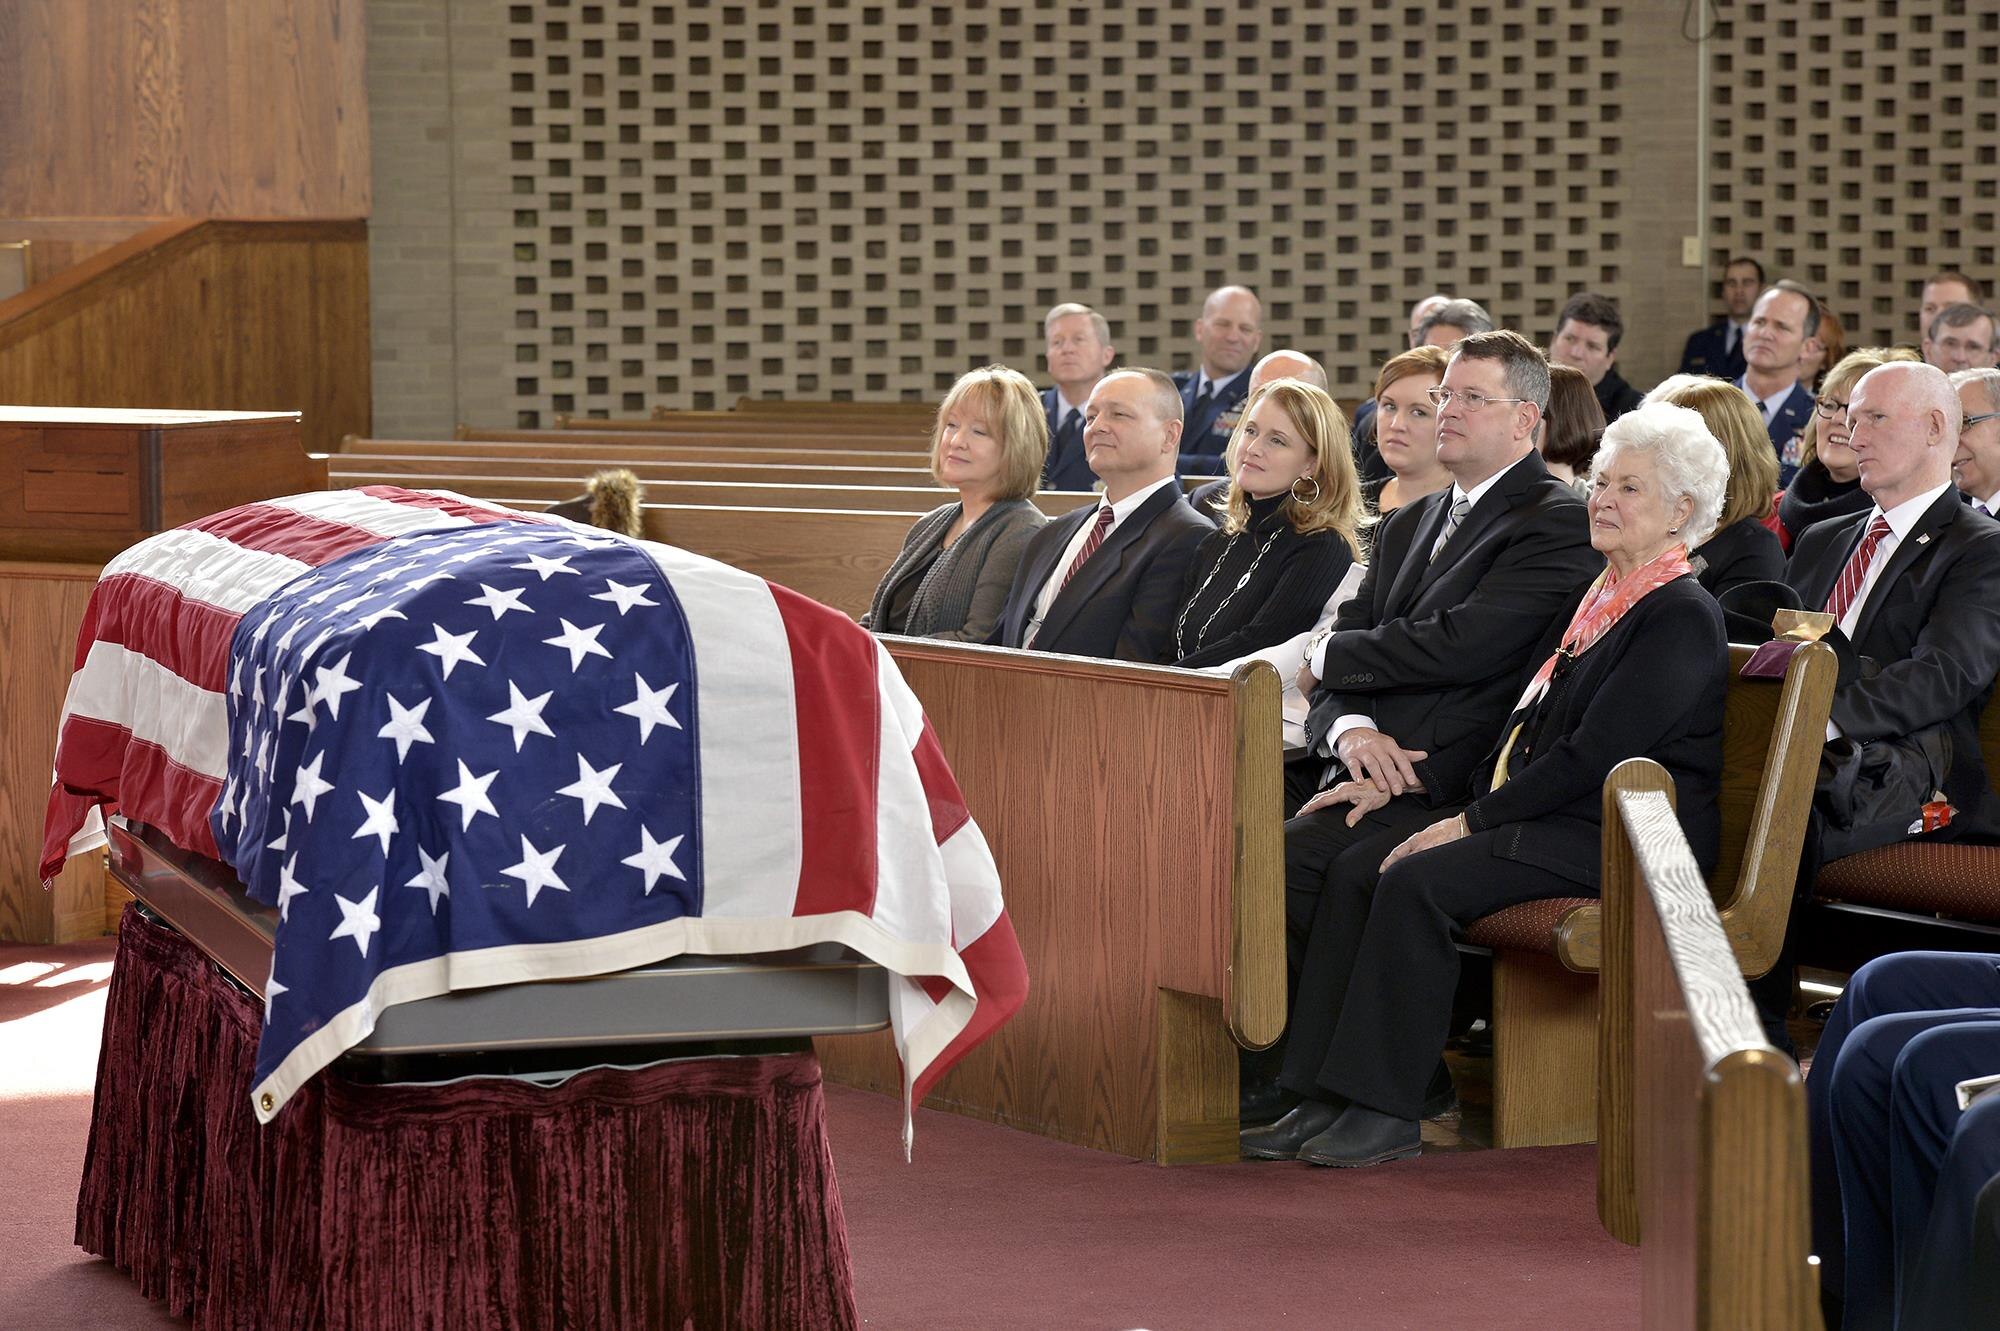 Family members of Brig. Gen. Robinson "Robbie" Risner listen to Air Force Chief of Staff Gen. Mark A. Welsh III and Ross Perot who spoke at Risner's internment ceremony at the Memorial chapel on Fort Myer, Arlington, Va., before he was laid to rest at Arlington National Cemetery, Jan. 23, 2014. Risner was one of the most celebrated pilots in Air Force history and survived seven and a half years of captivity in Hoa Lo Prison, also known as the Hanoi Hilton. (U.S. Air Force photo/Michael J. Pausic)